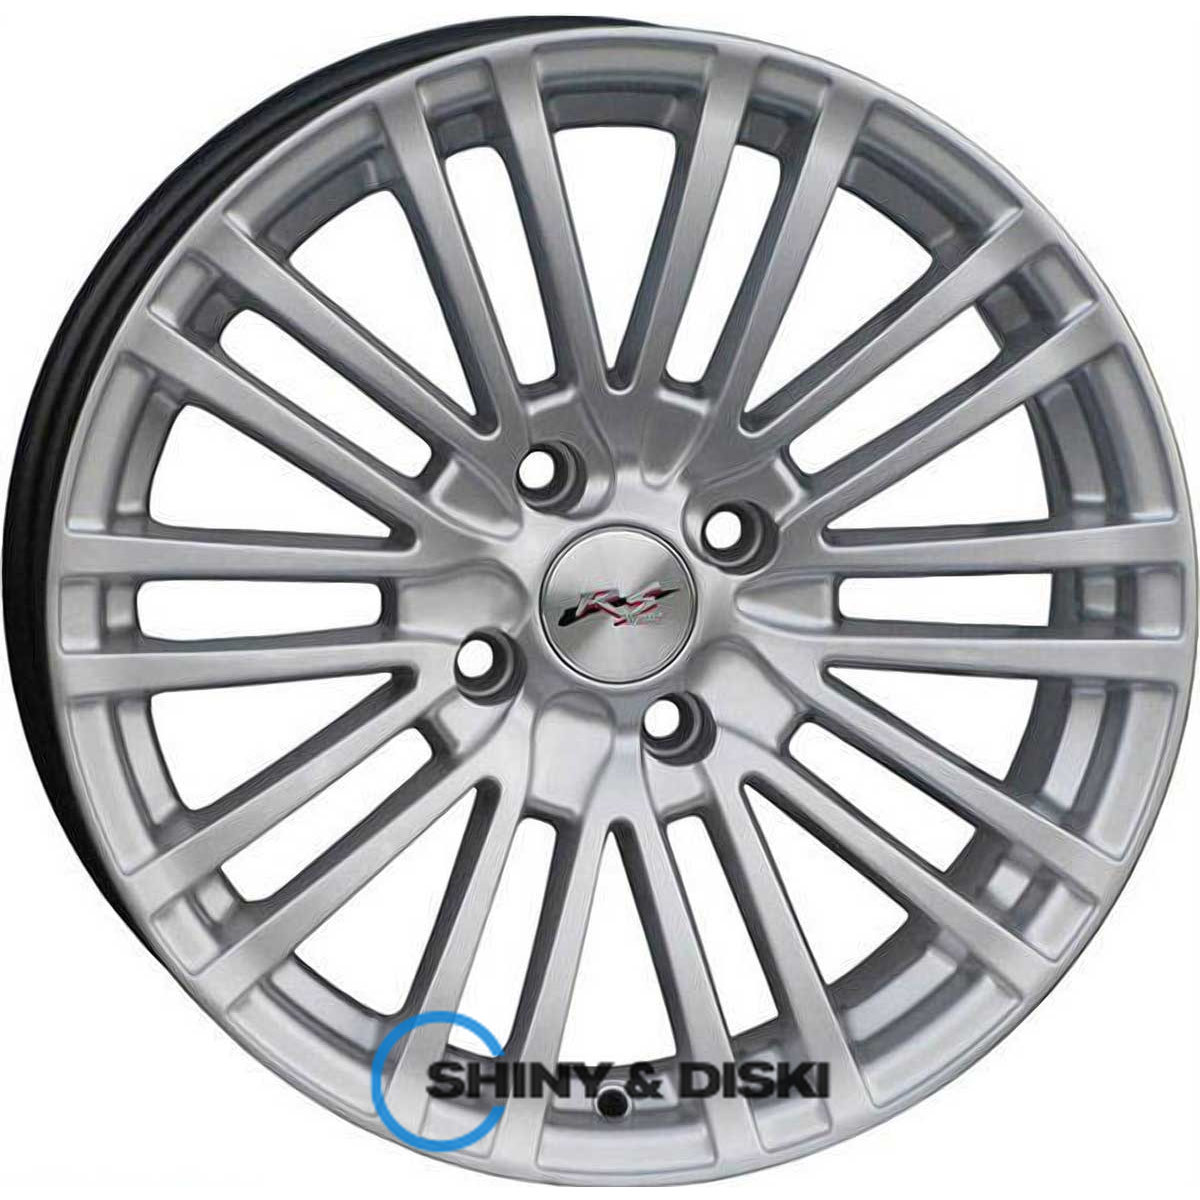 rs tuning 238 hs r14 w6 pcd5x100 et35 dia57.1